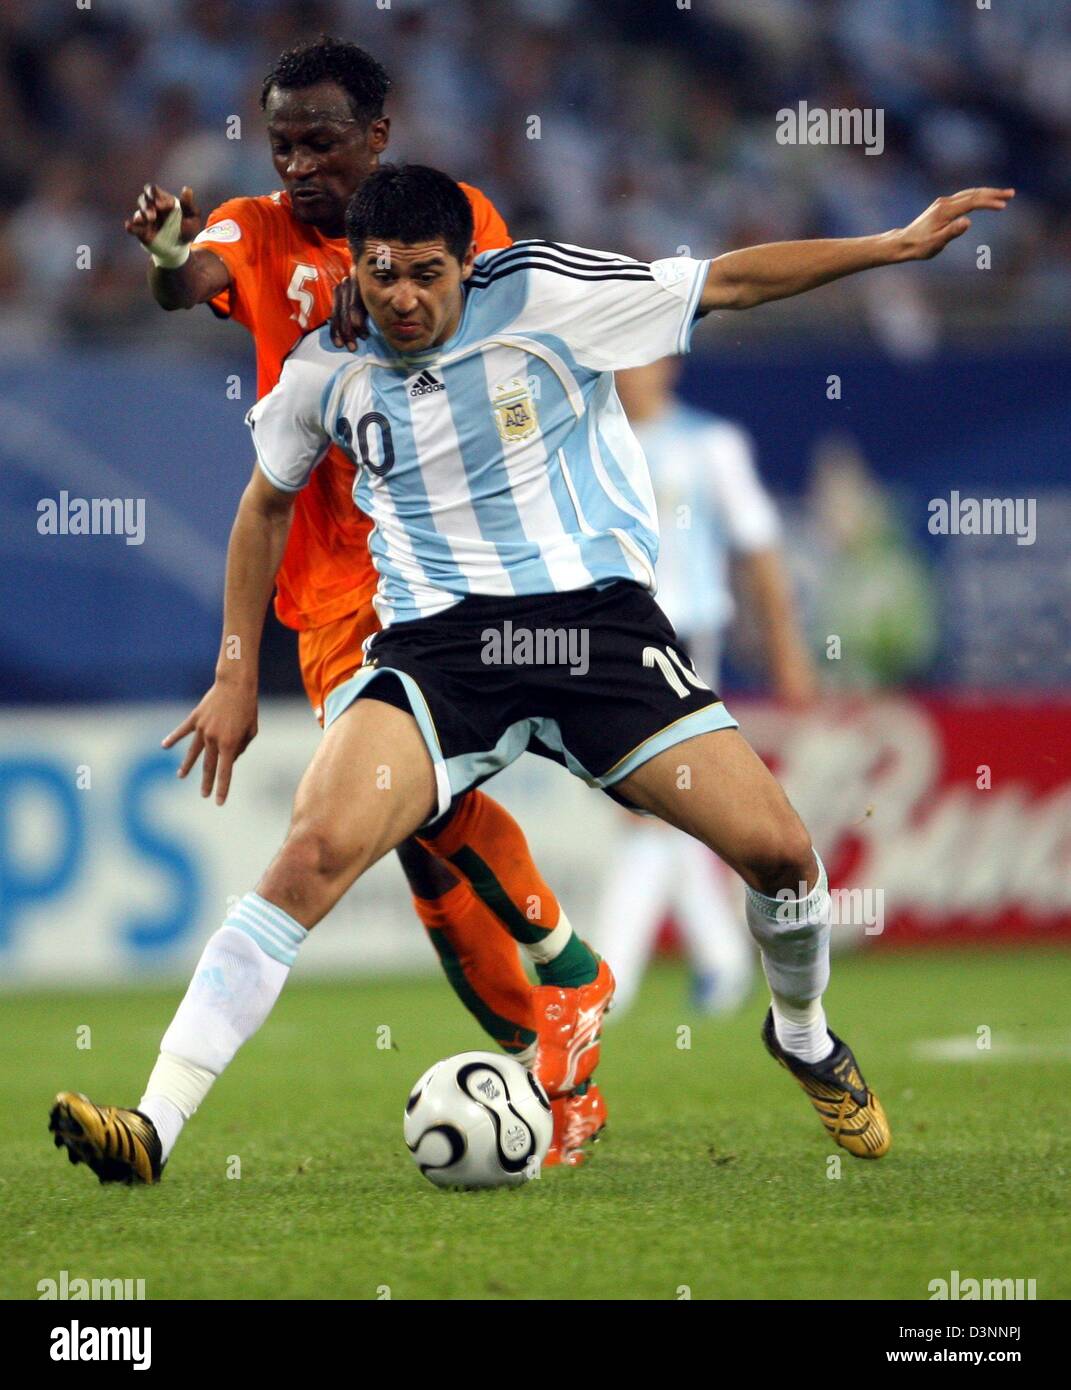 The Argentinian player Juan Riquelme (front) fights for the ball with Didier Zokora from Ivory Coast during the group C preliminary match of 2006 FIFA World Cup between Argentina and the Ivory Coast in Hamburg, on Saturday, 10 June 2006. Argentina won 2:1. DPA/KAY NIETFELD +++ Mobile Services OUT +++ Please also refer to FIFA's Terms and Conditions. Stock Photo